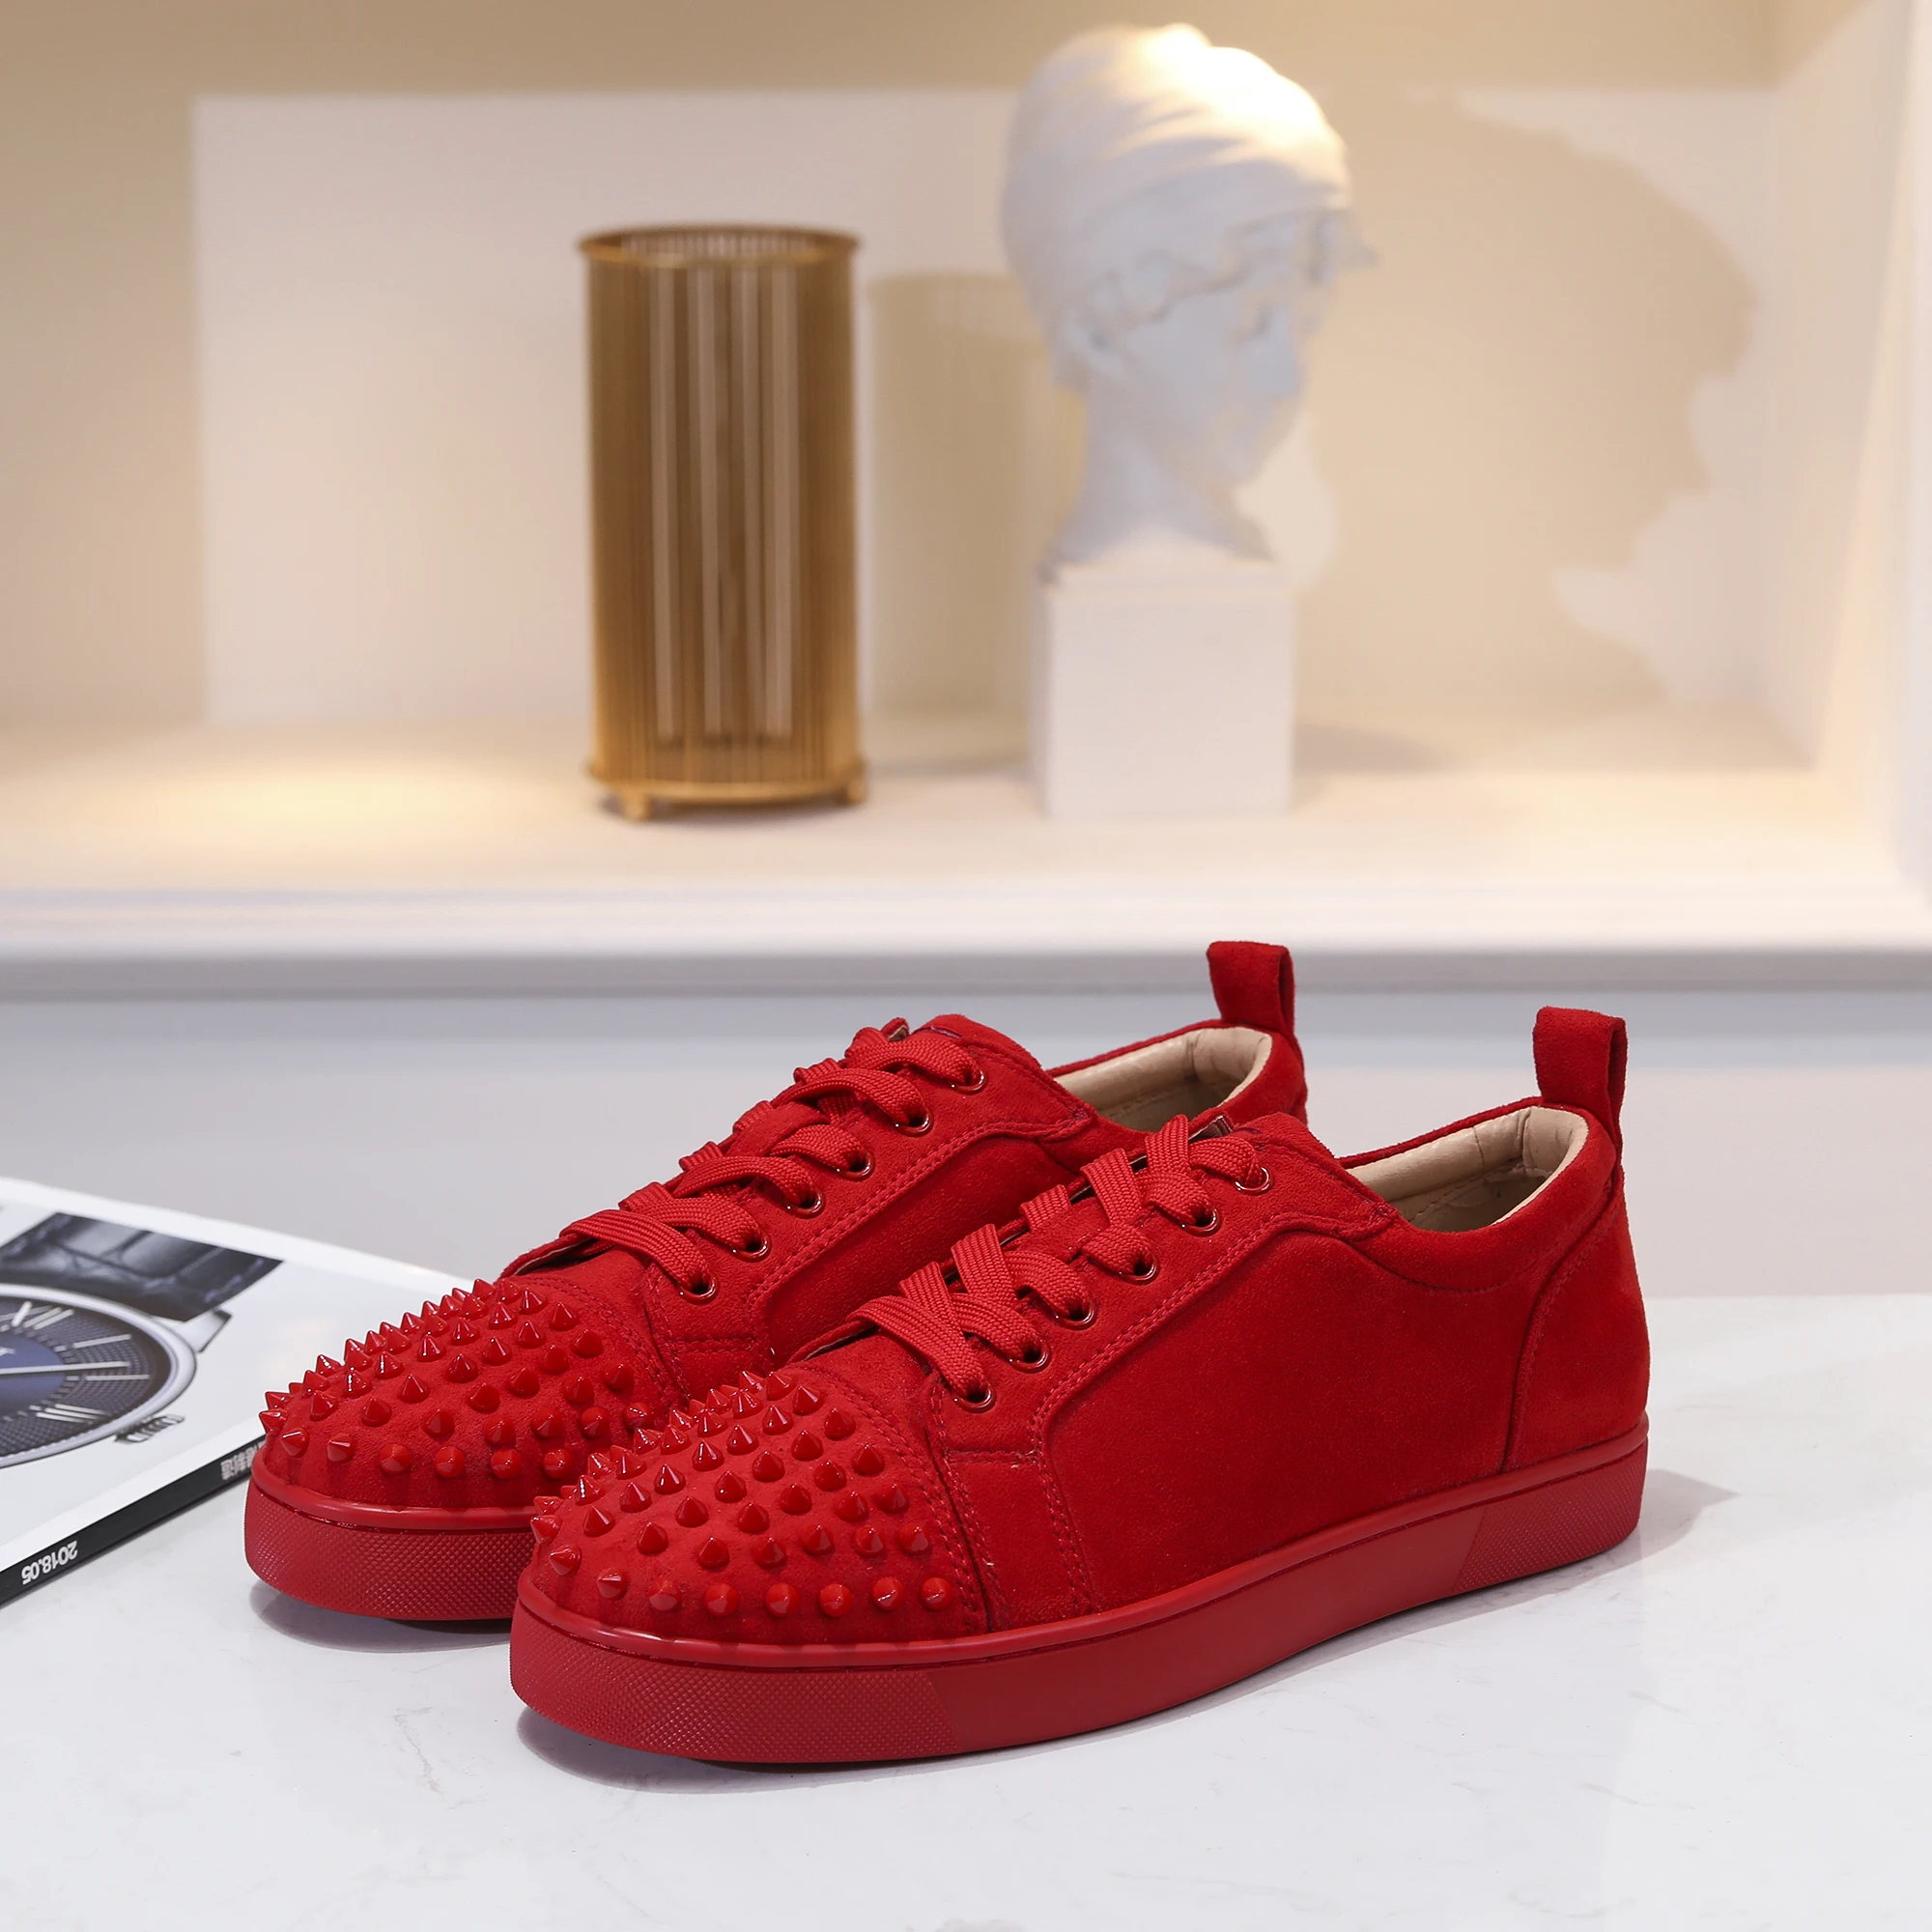 2019 Luxury Sneaker Studded Spikes Men Trainers Red Bottom Shoes